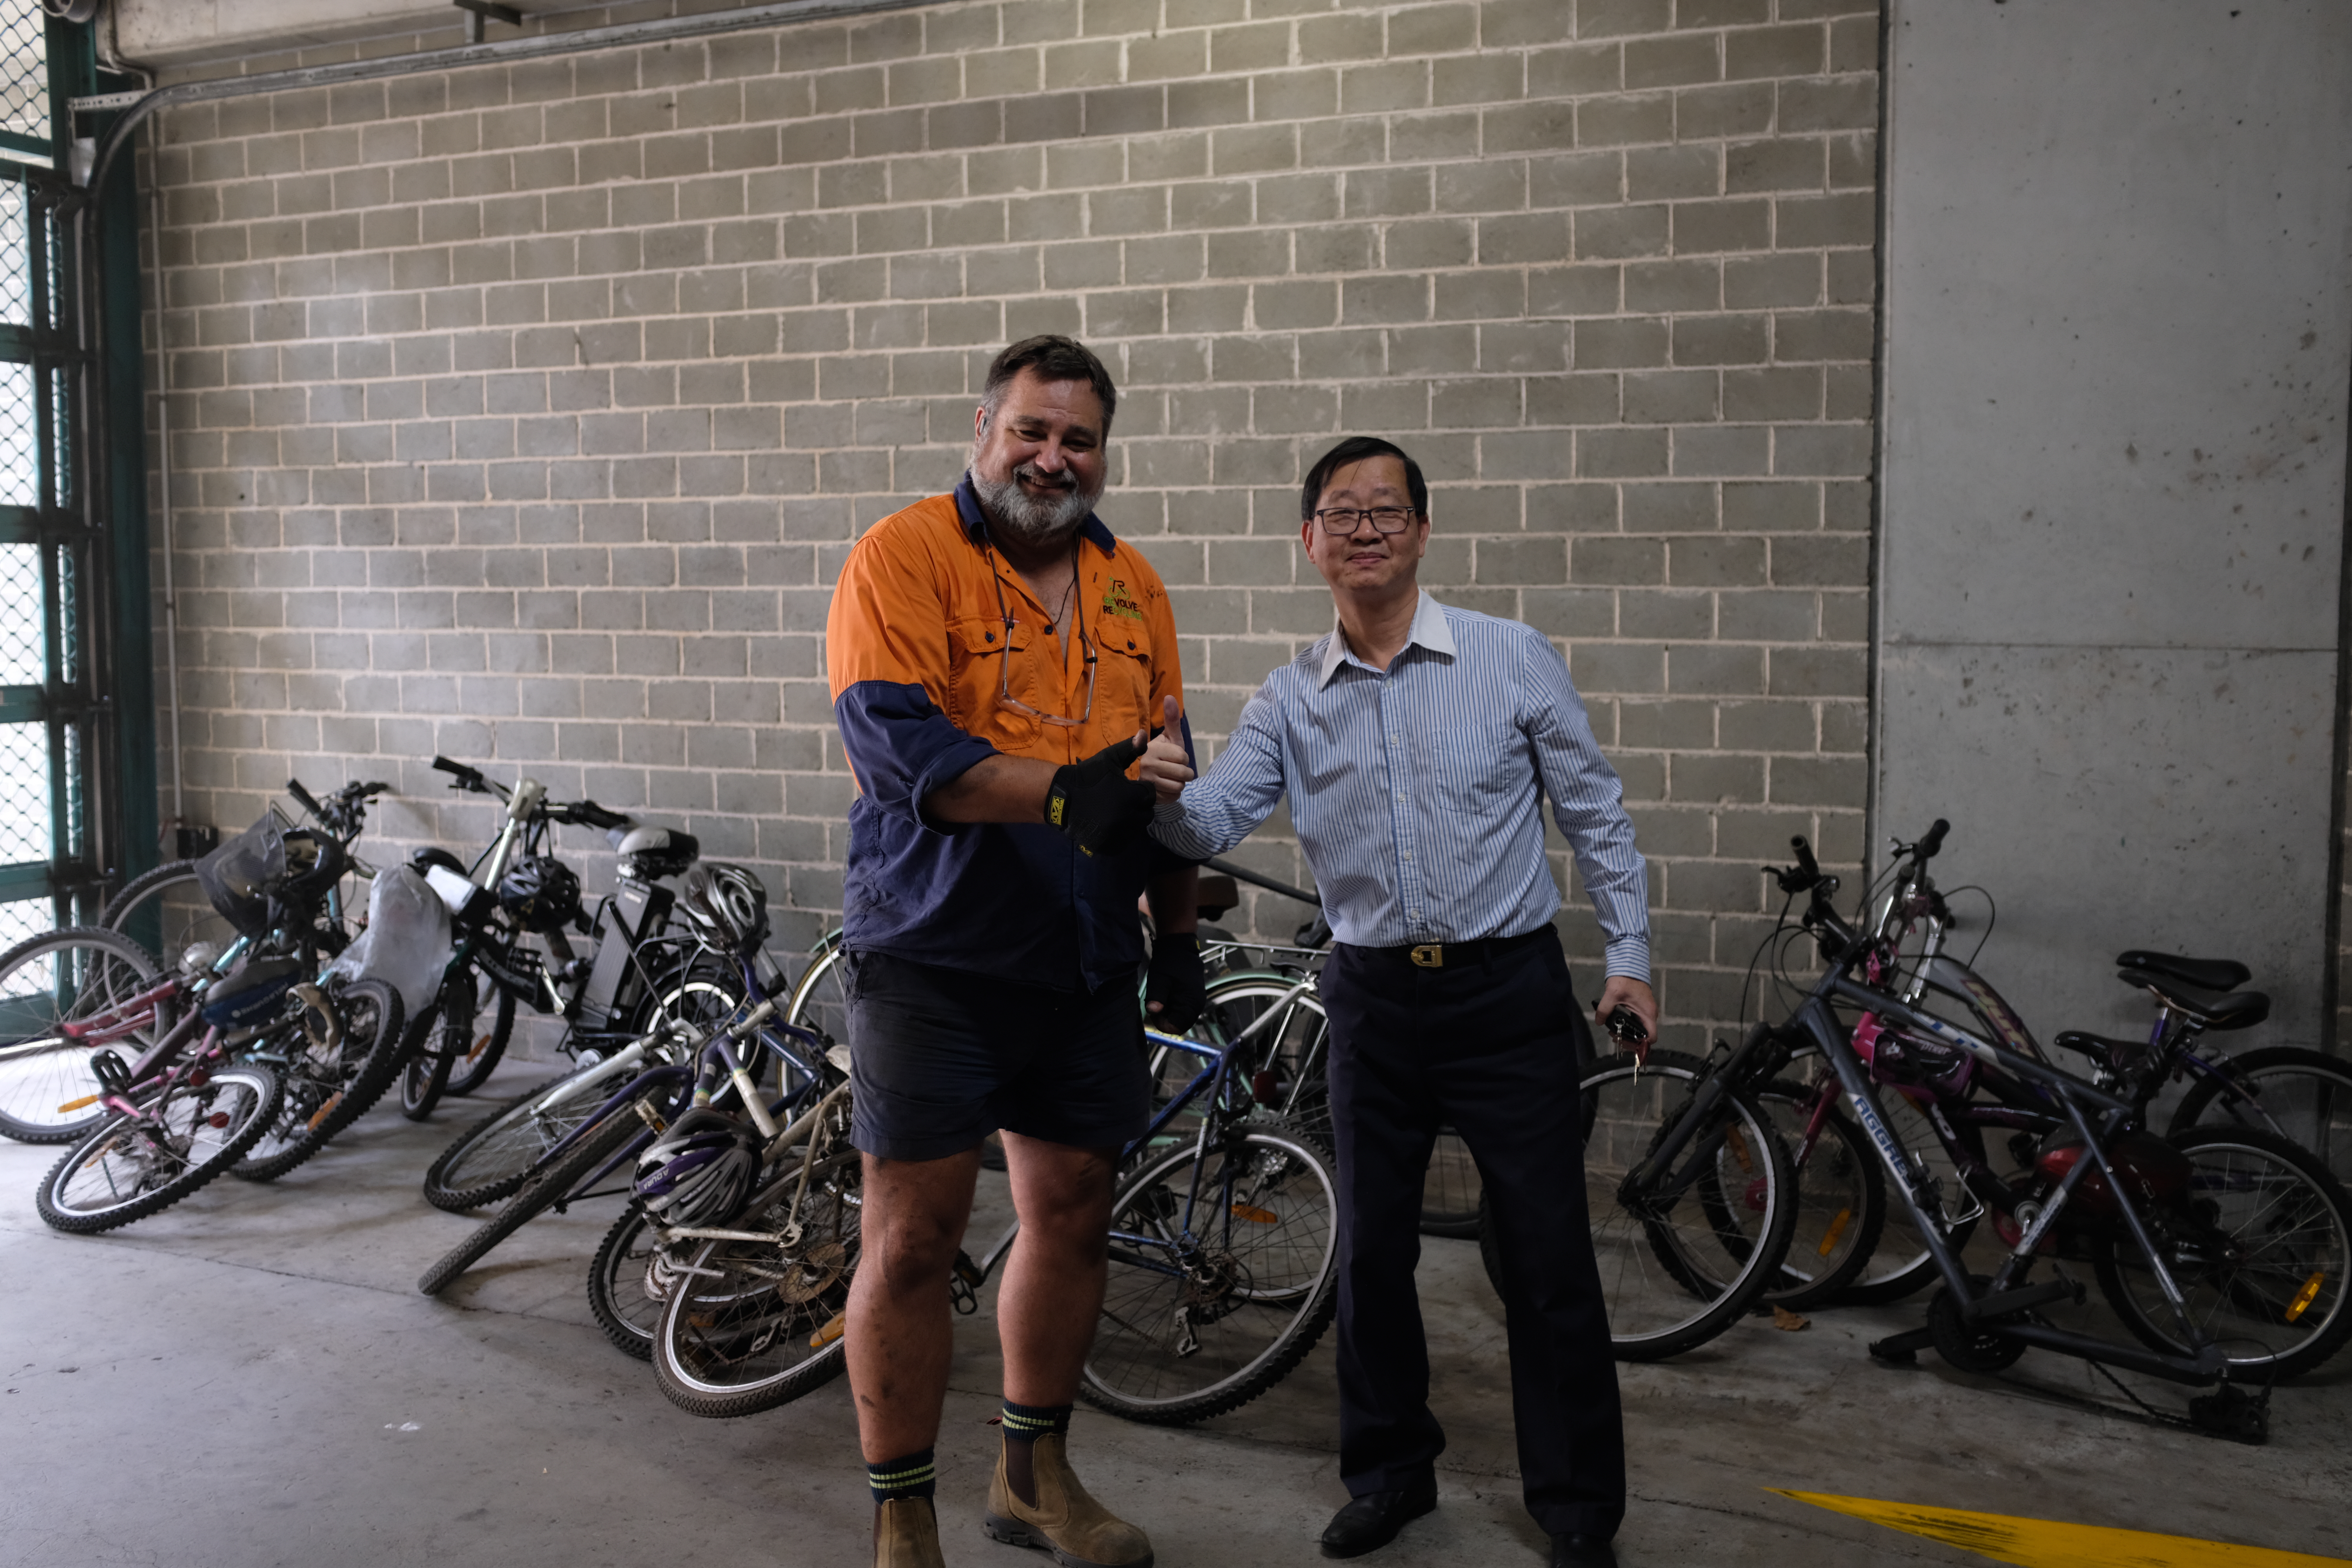 Owner of revolve recylcing and building manager simon in front of bikes